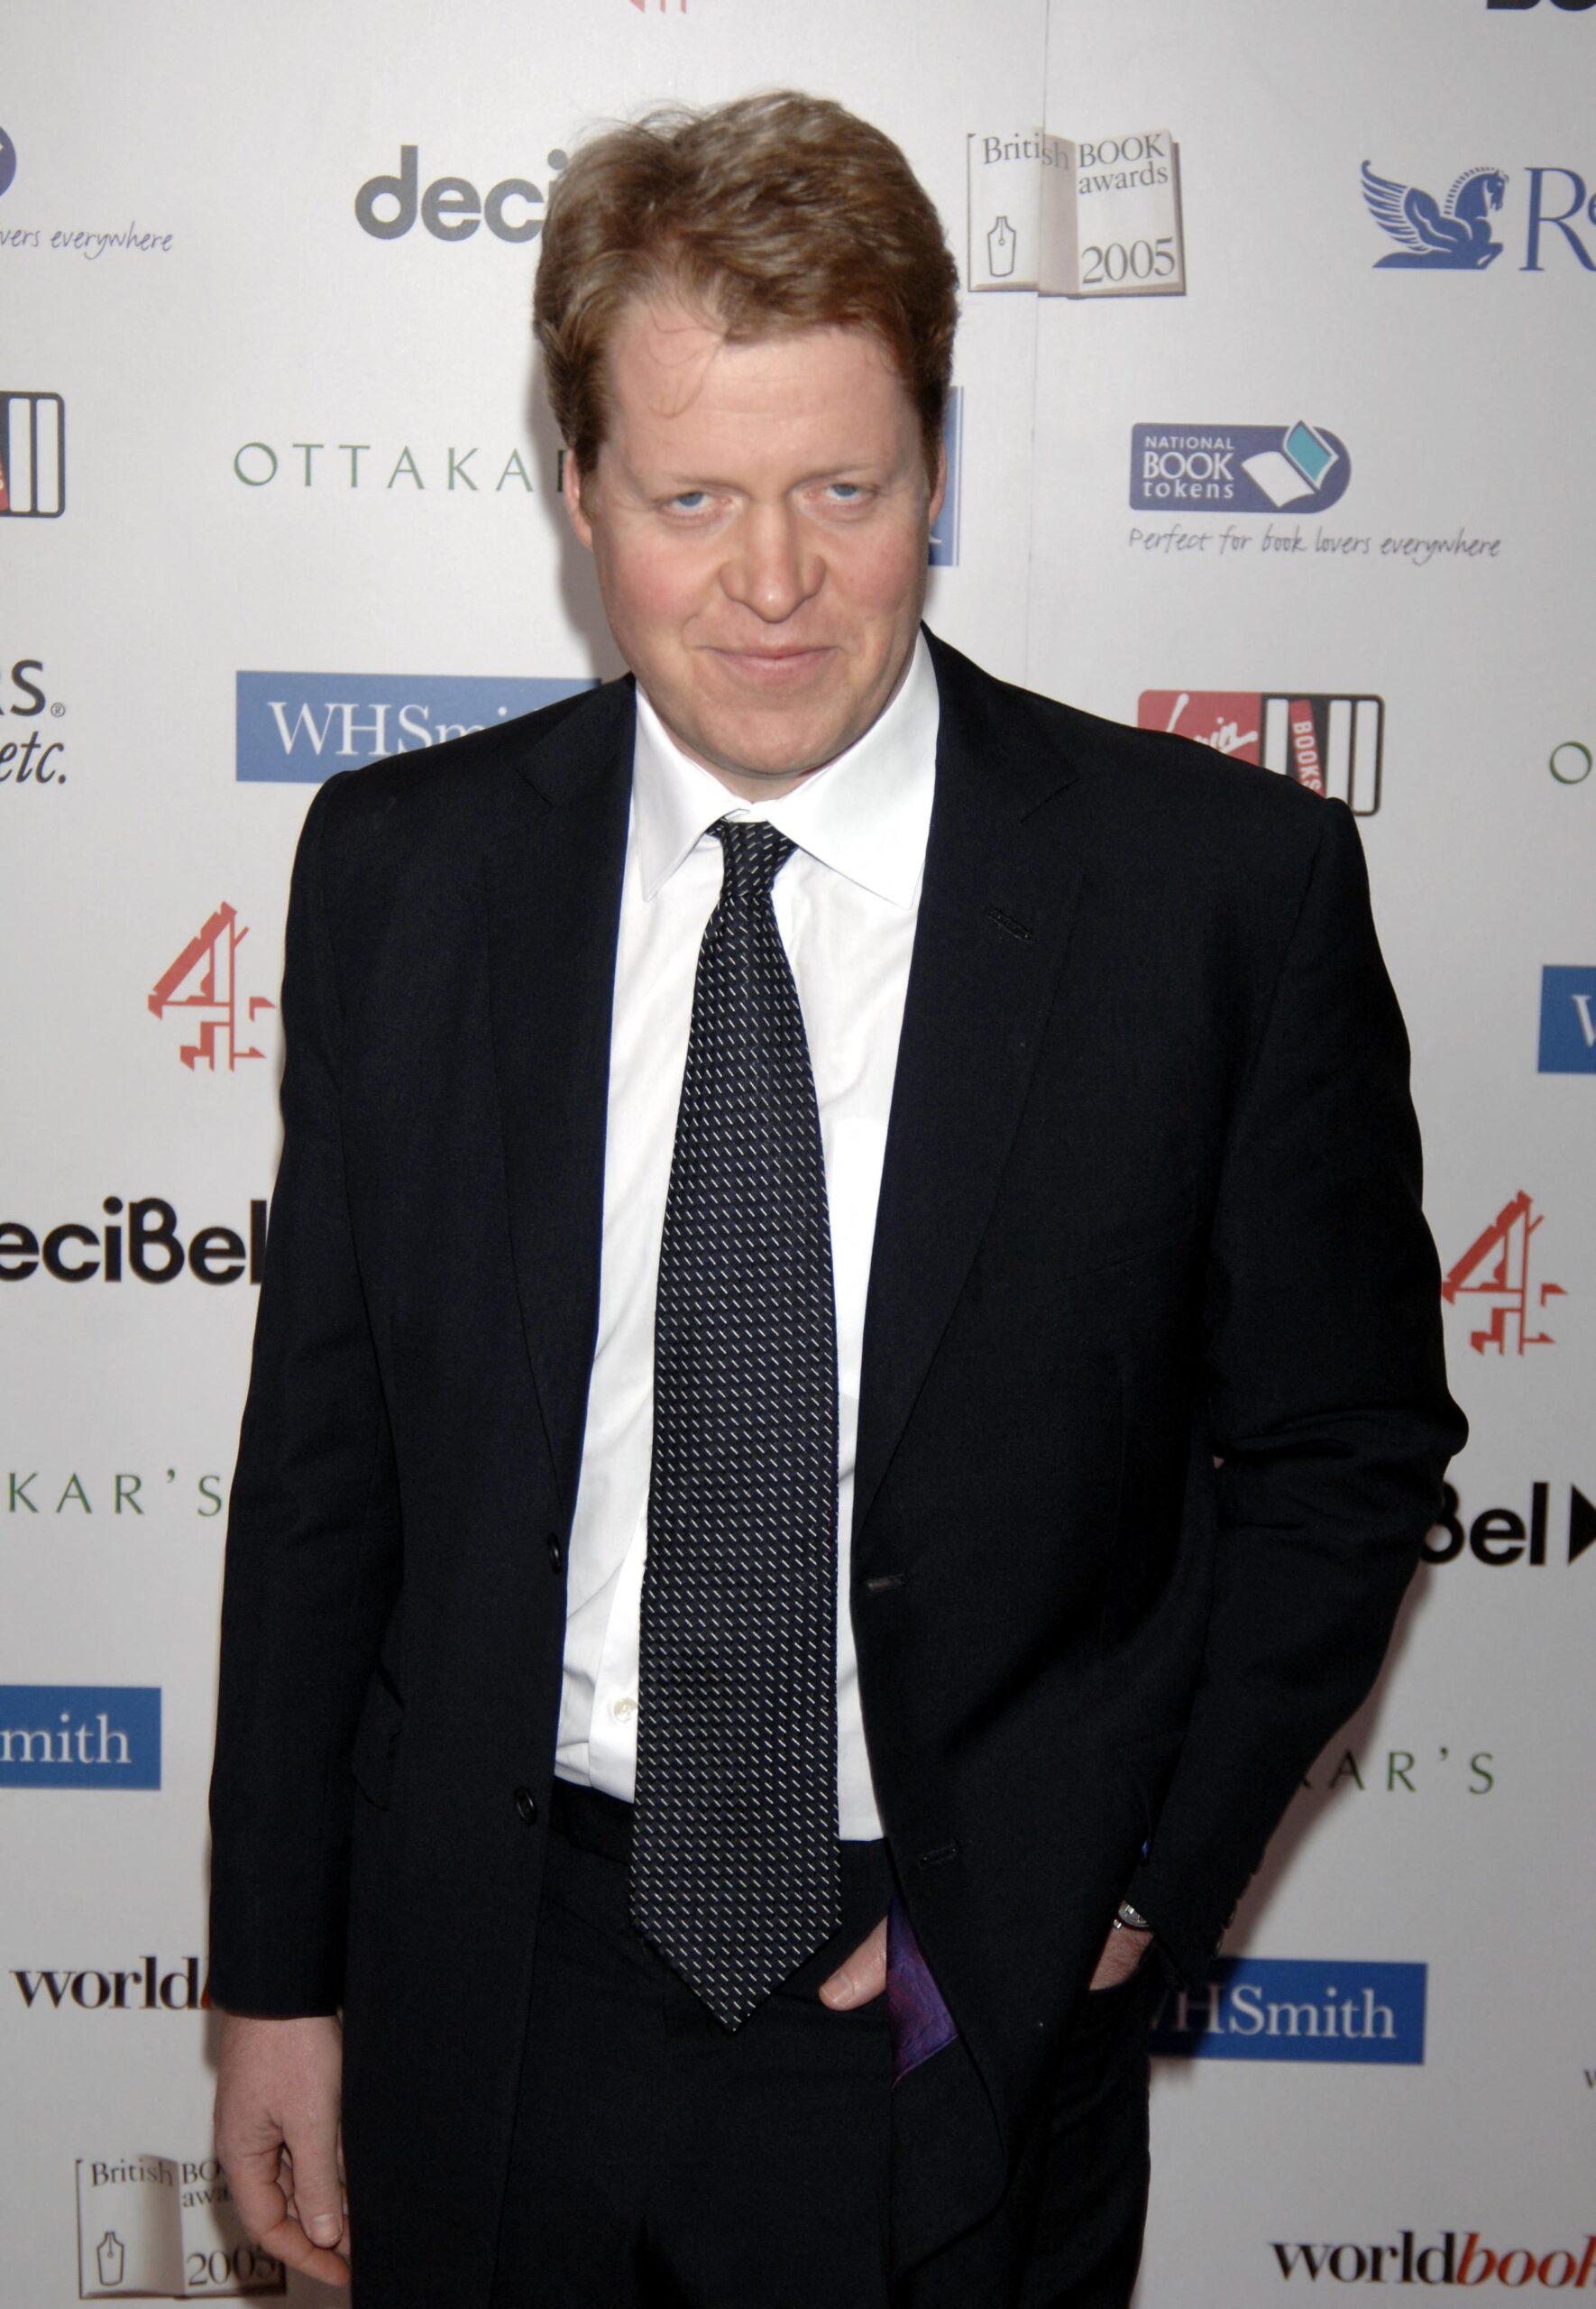 Charles Spencer, 9th Earl Spencer and brother of the late Diana, Princess of Wales